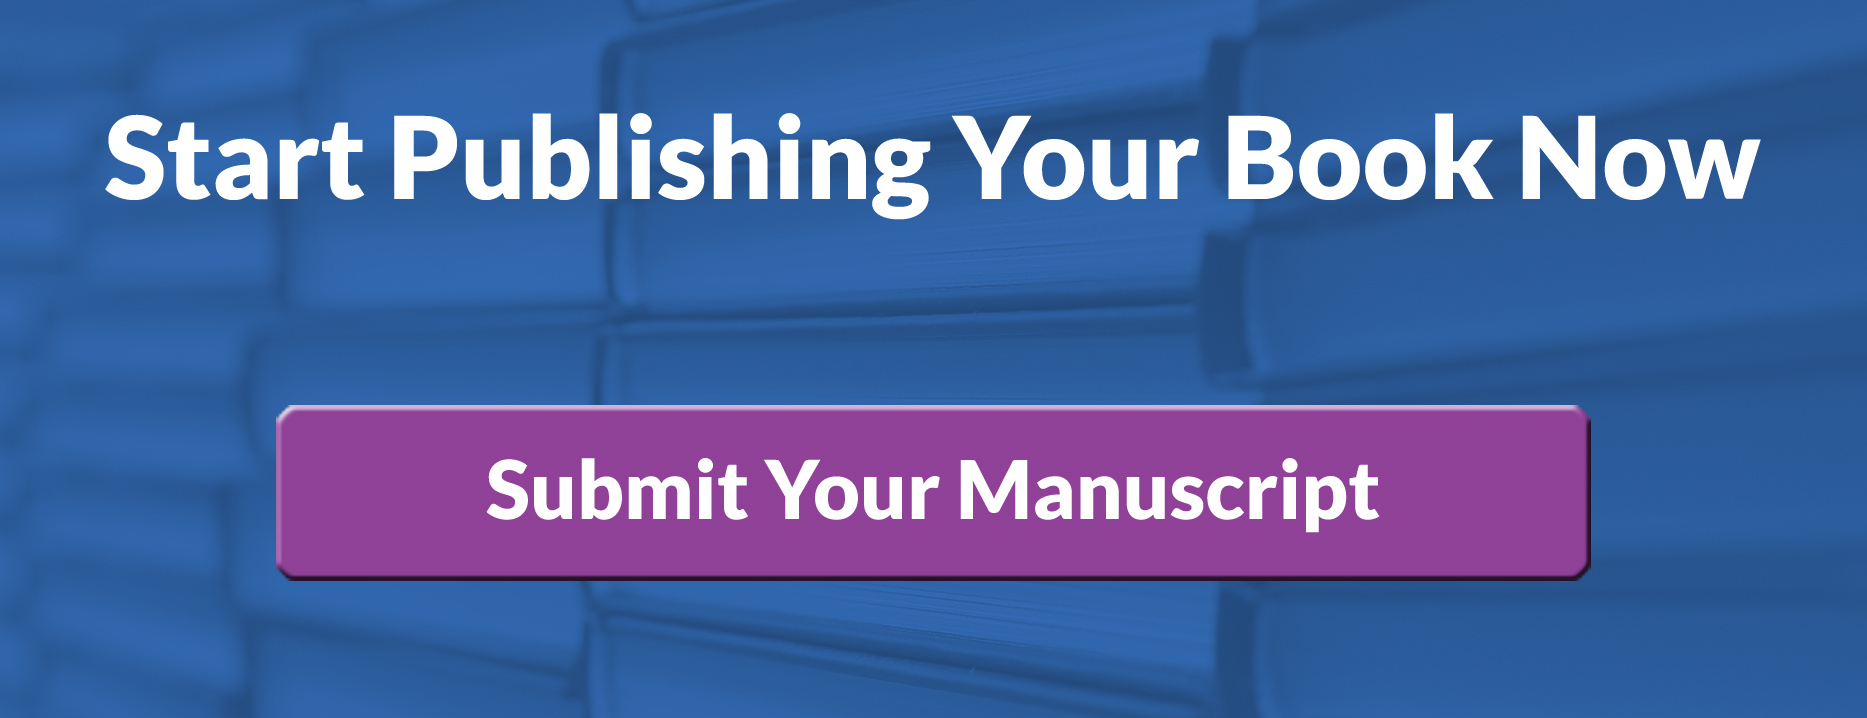 Start your book publishing process today with Outskirts Press.